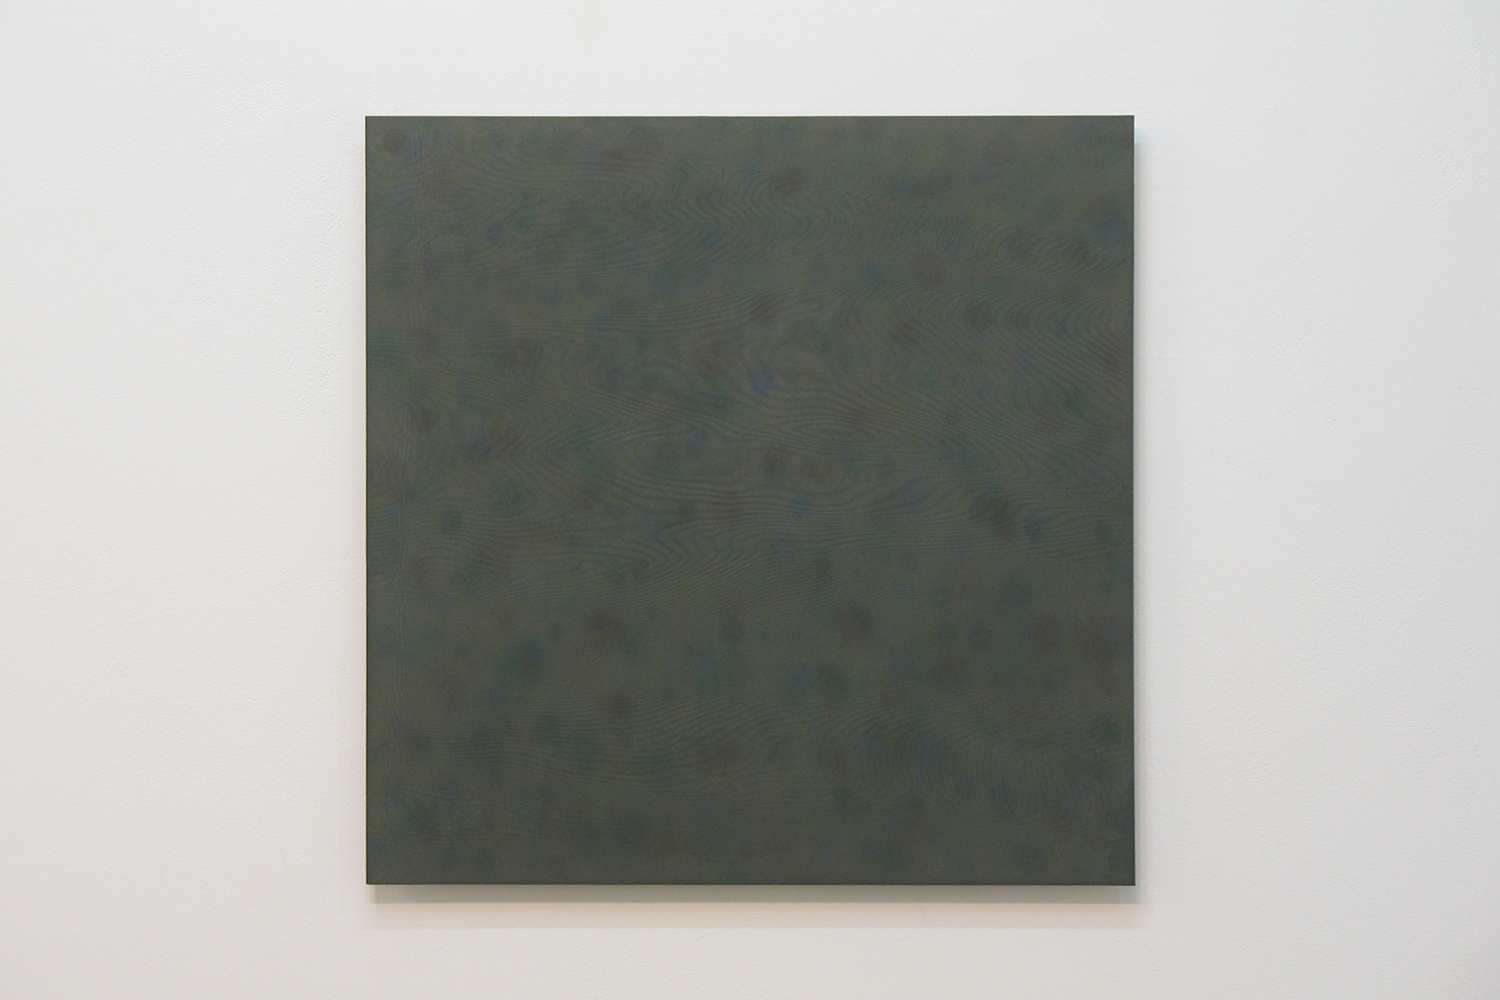 Untitled GY｜Acrylic board, stainless steel sheet, glass organdy, acrylic paint｜60 x 60 cm｜2011<br>¥150,000 - 400,000